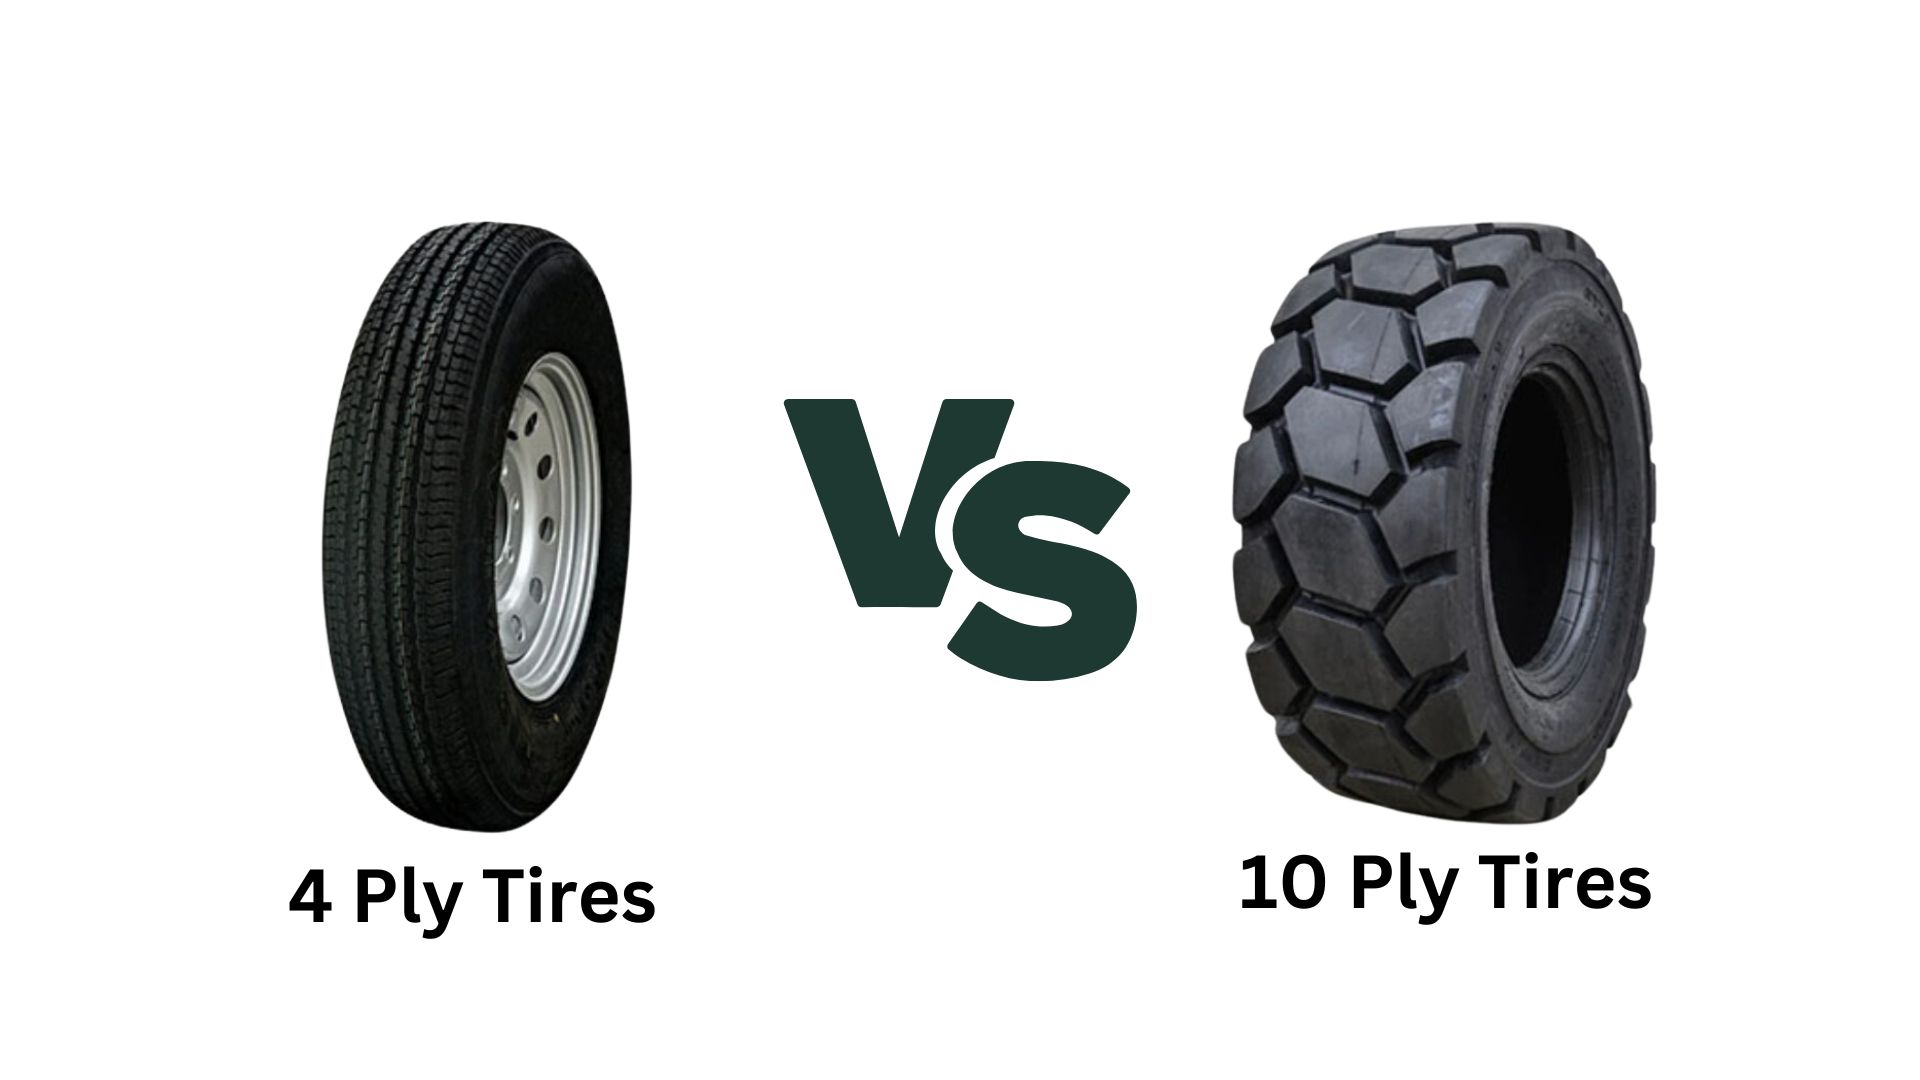 Comparative Analysis of 4 Ply Tires with 10 Ply Tires